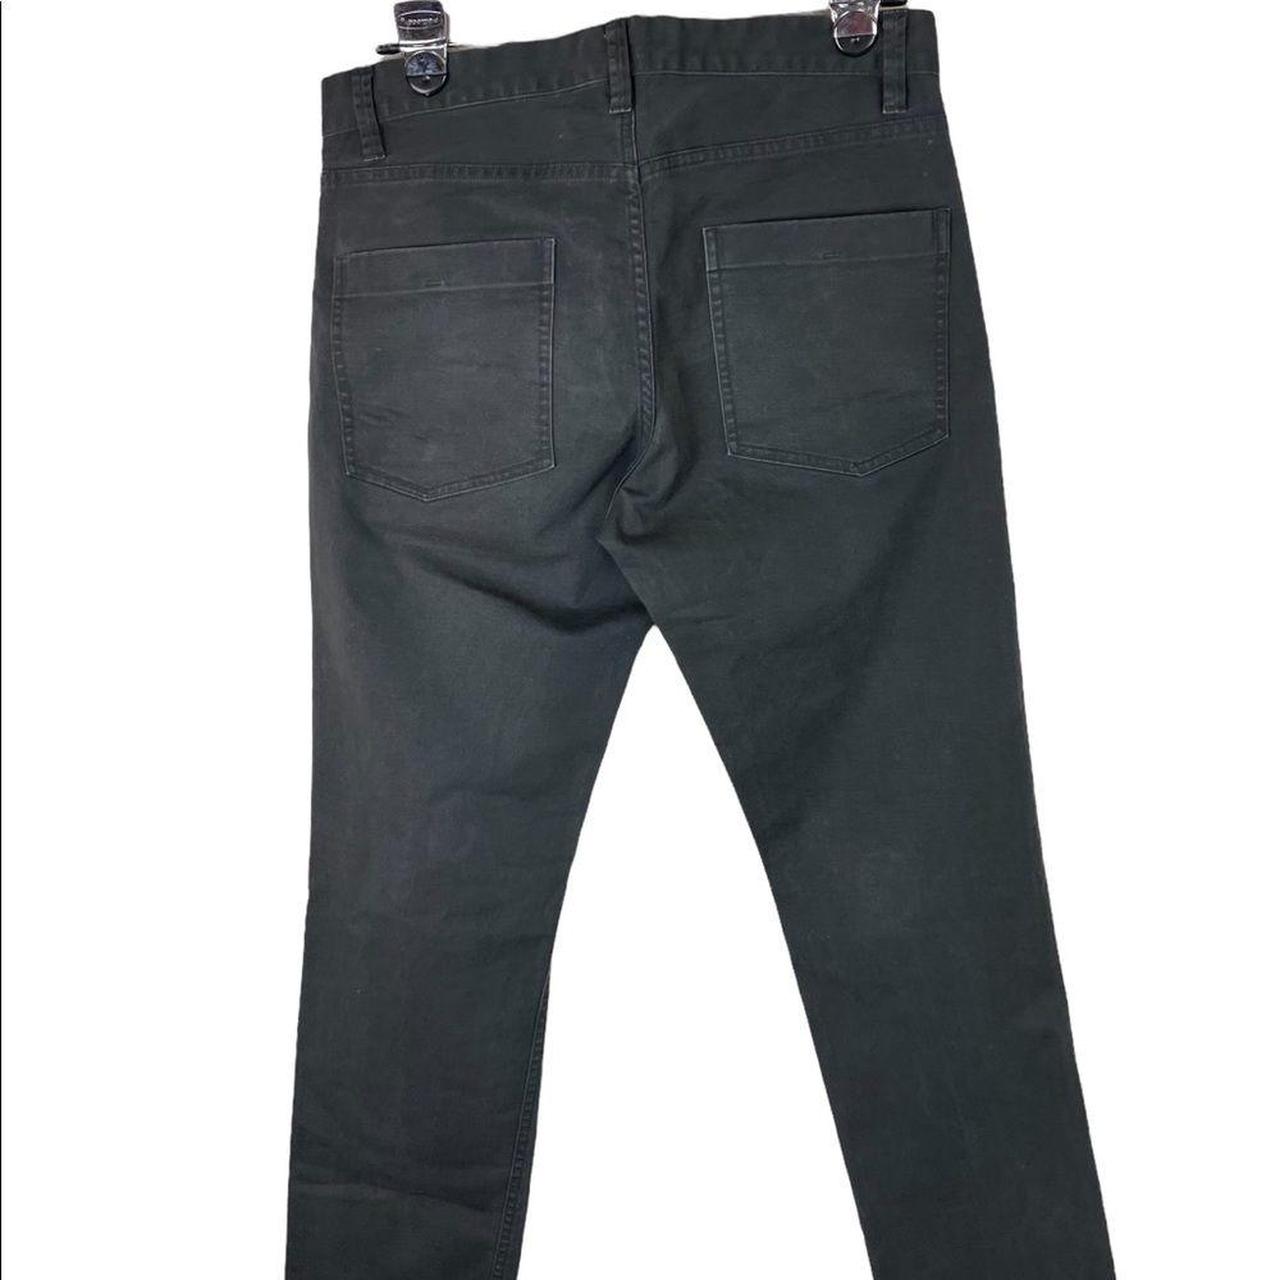 Product Image 3 - These Theory pants are a